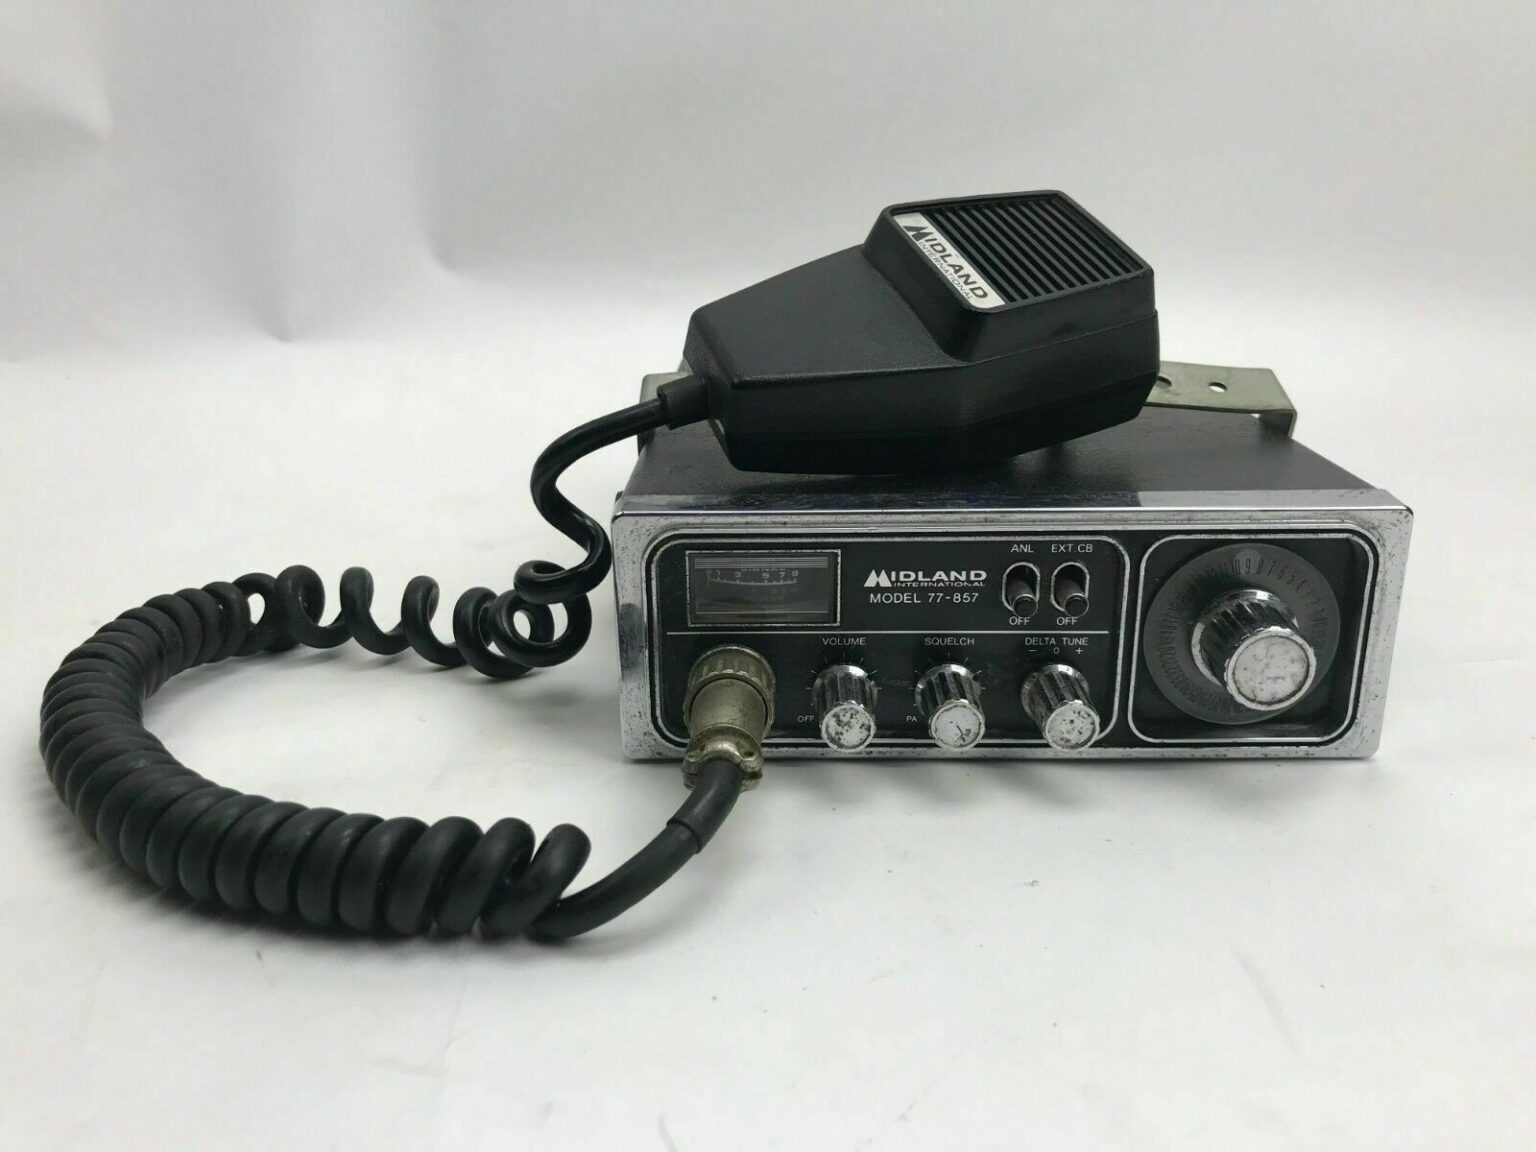 CB radio is an influential device for communication. Check out how CB radio remains relevant, even with new advancements in communication.